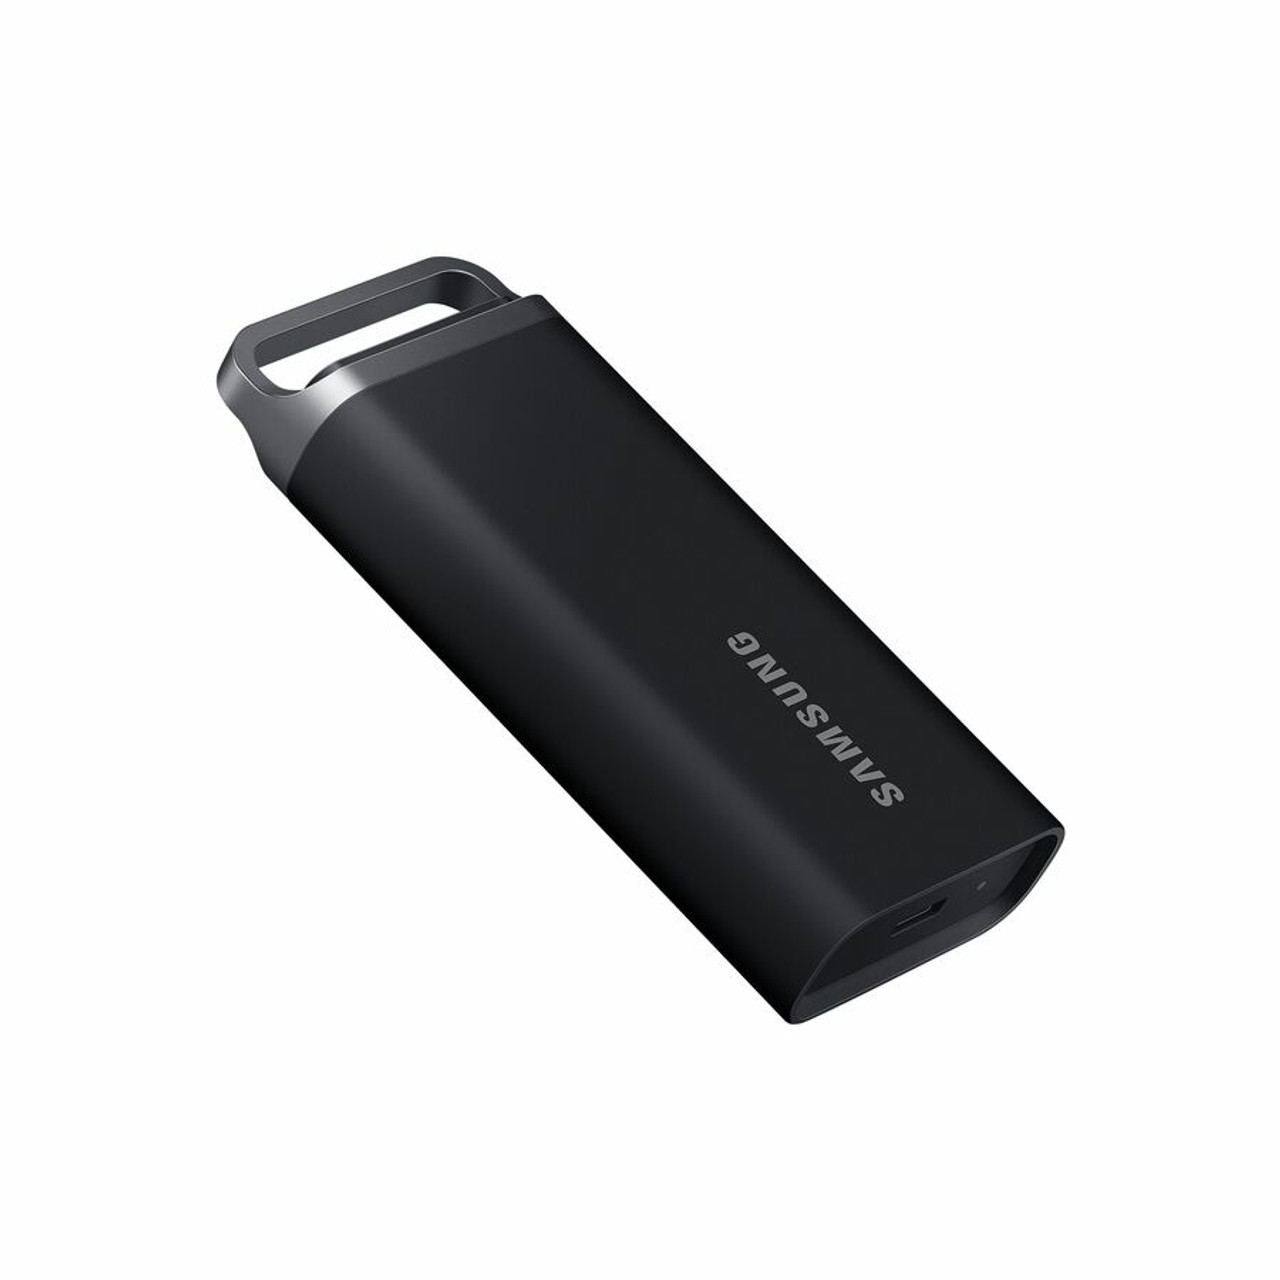  SAMSUNG T5 EVO Portable SSD 4TB, USB 3.2 Gen 1 External Solid  State Drive, Seq. Read Speeds Up to 460MB/s for Gaming and Content  Creation, MU-PH4T0S/AM, Black : Electronics